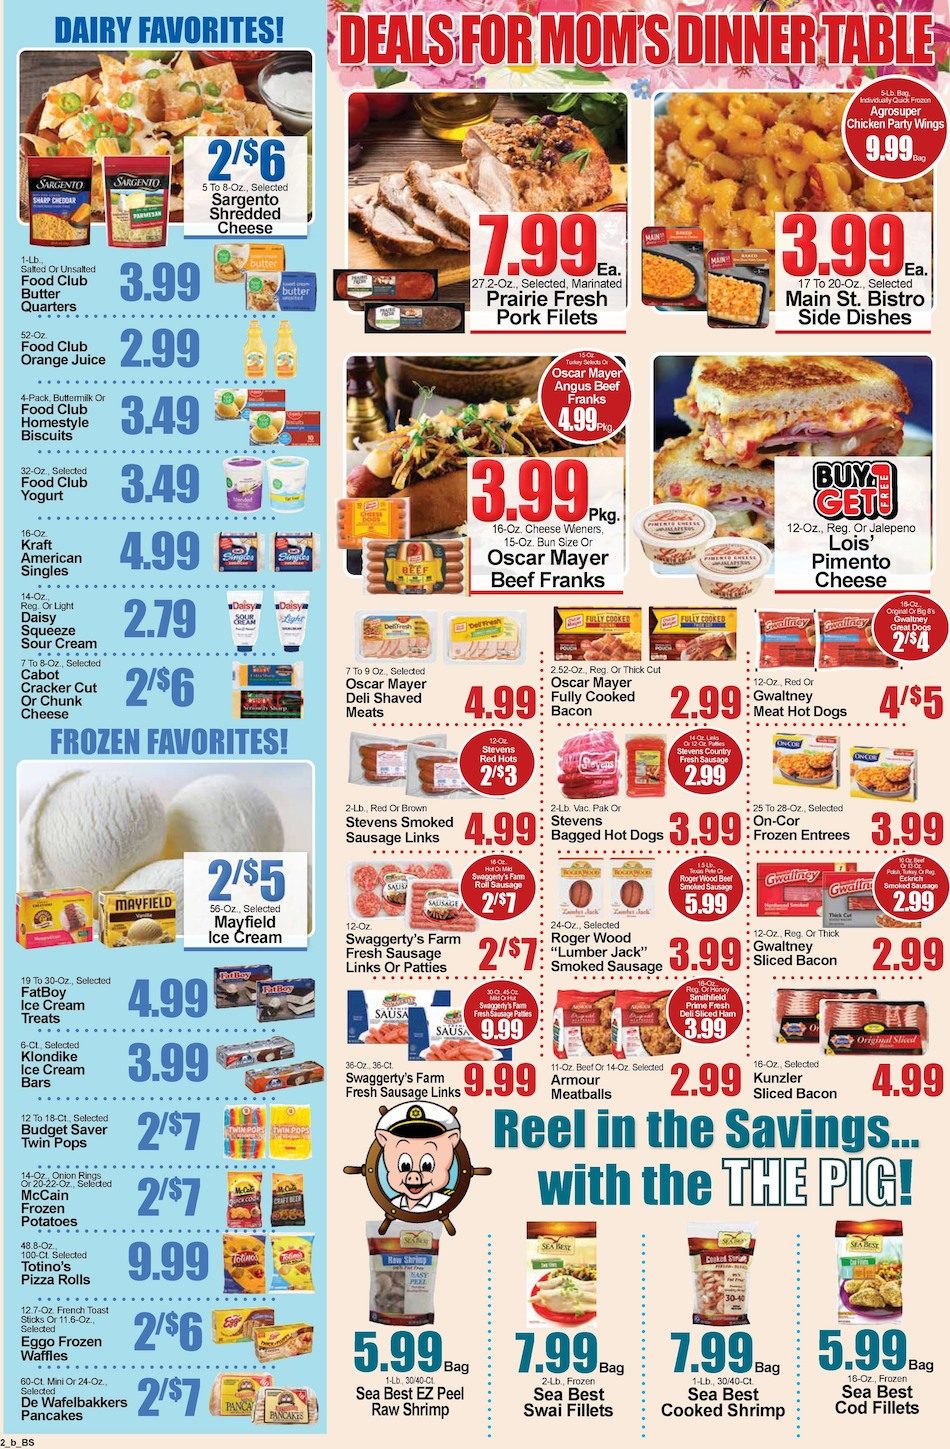 piggly wiggly watertown wi weekly ad